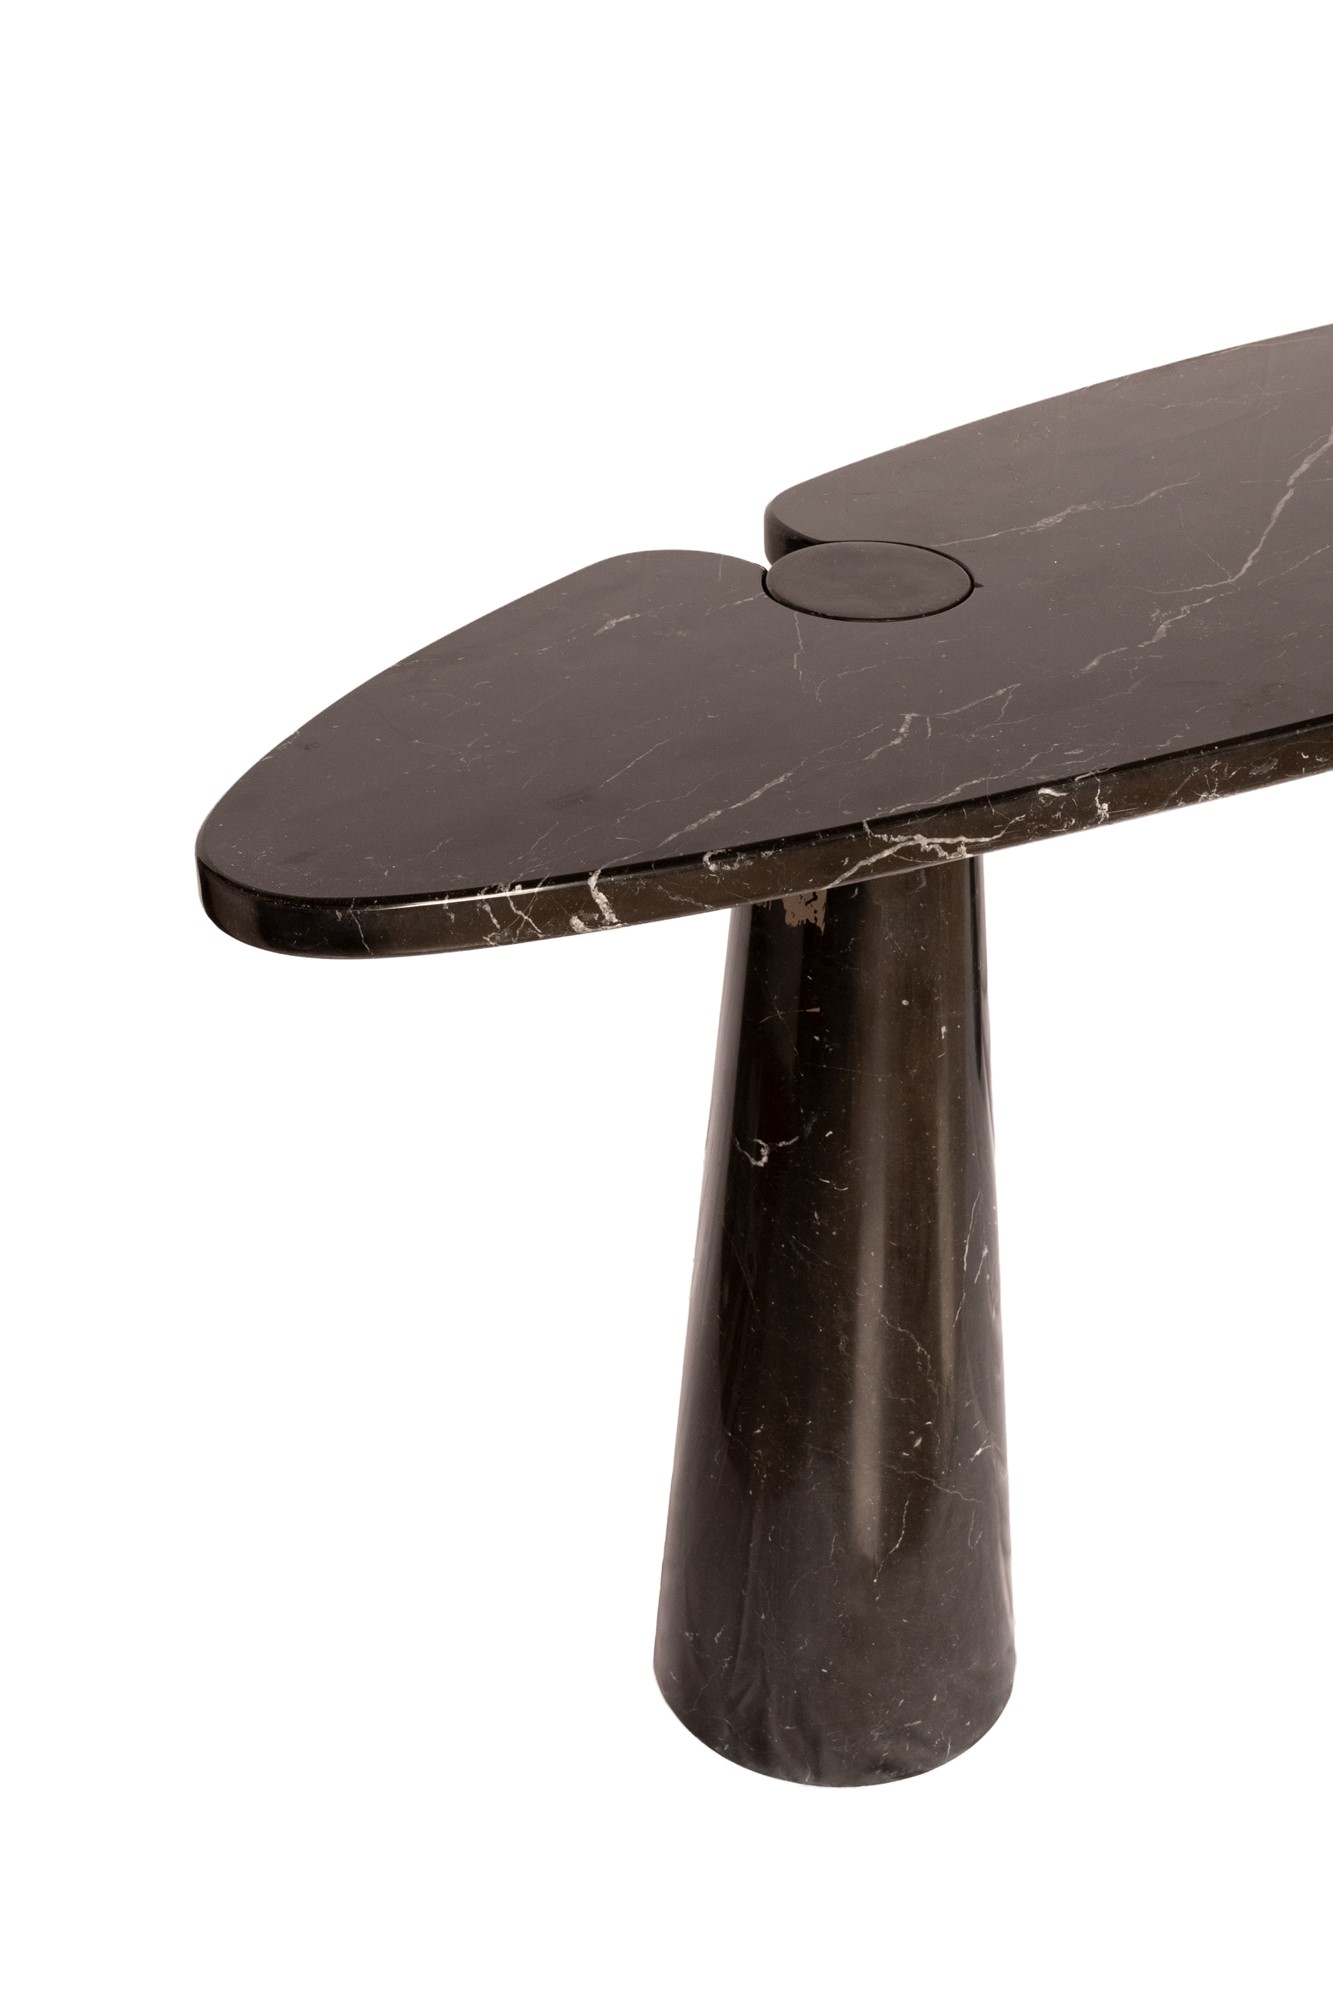 Angelo Mangiarotti Black marble console table by Marquina from the Eros series - Image 20 of 27